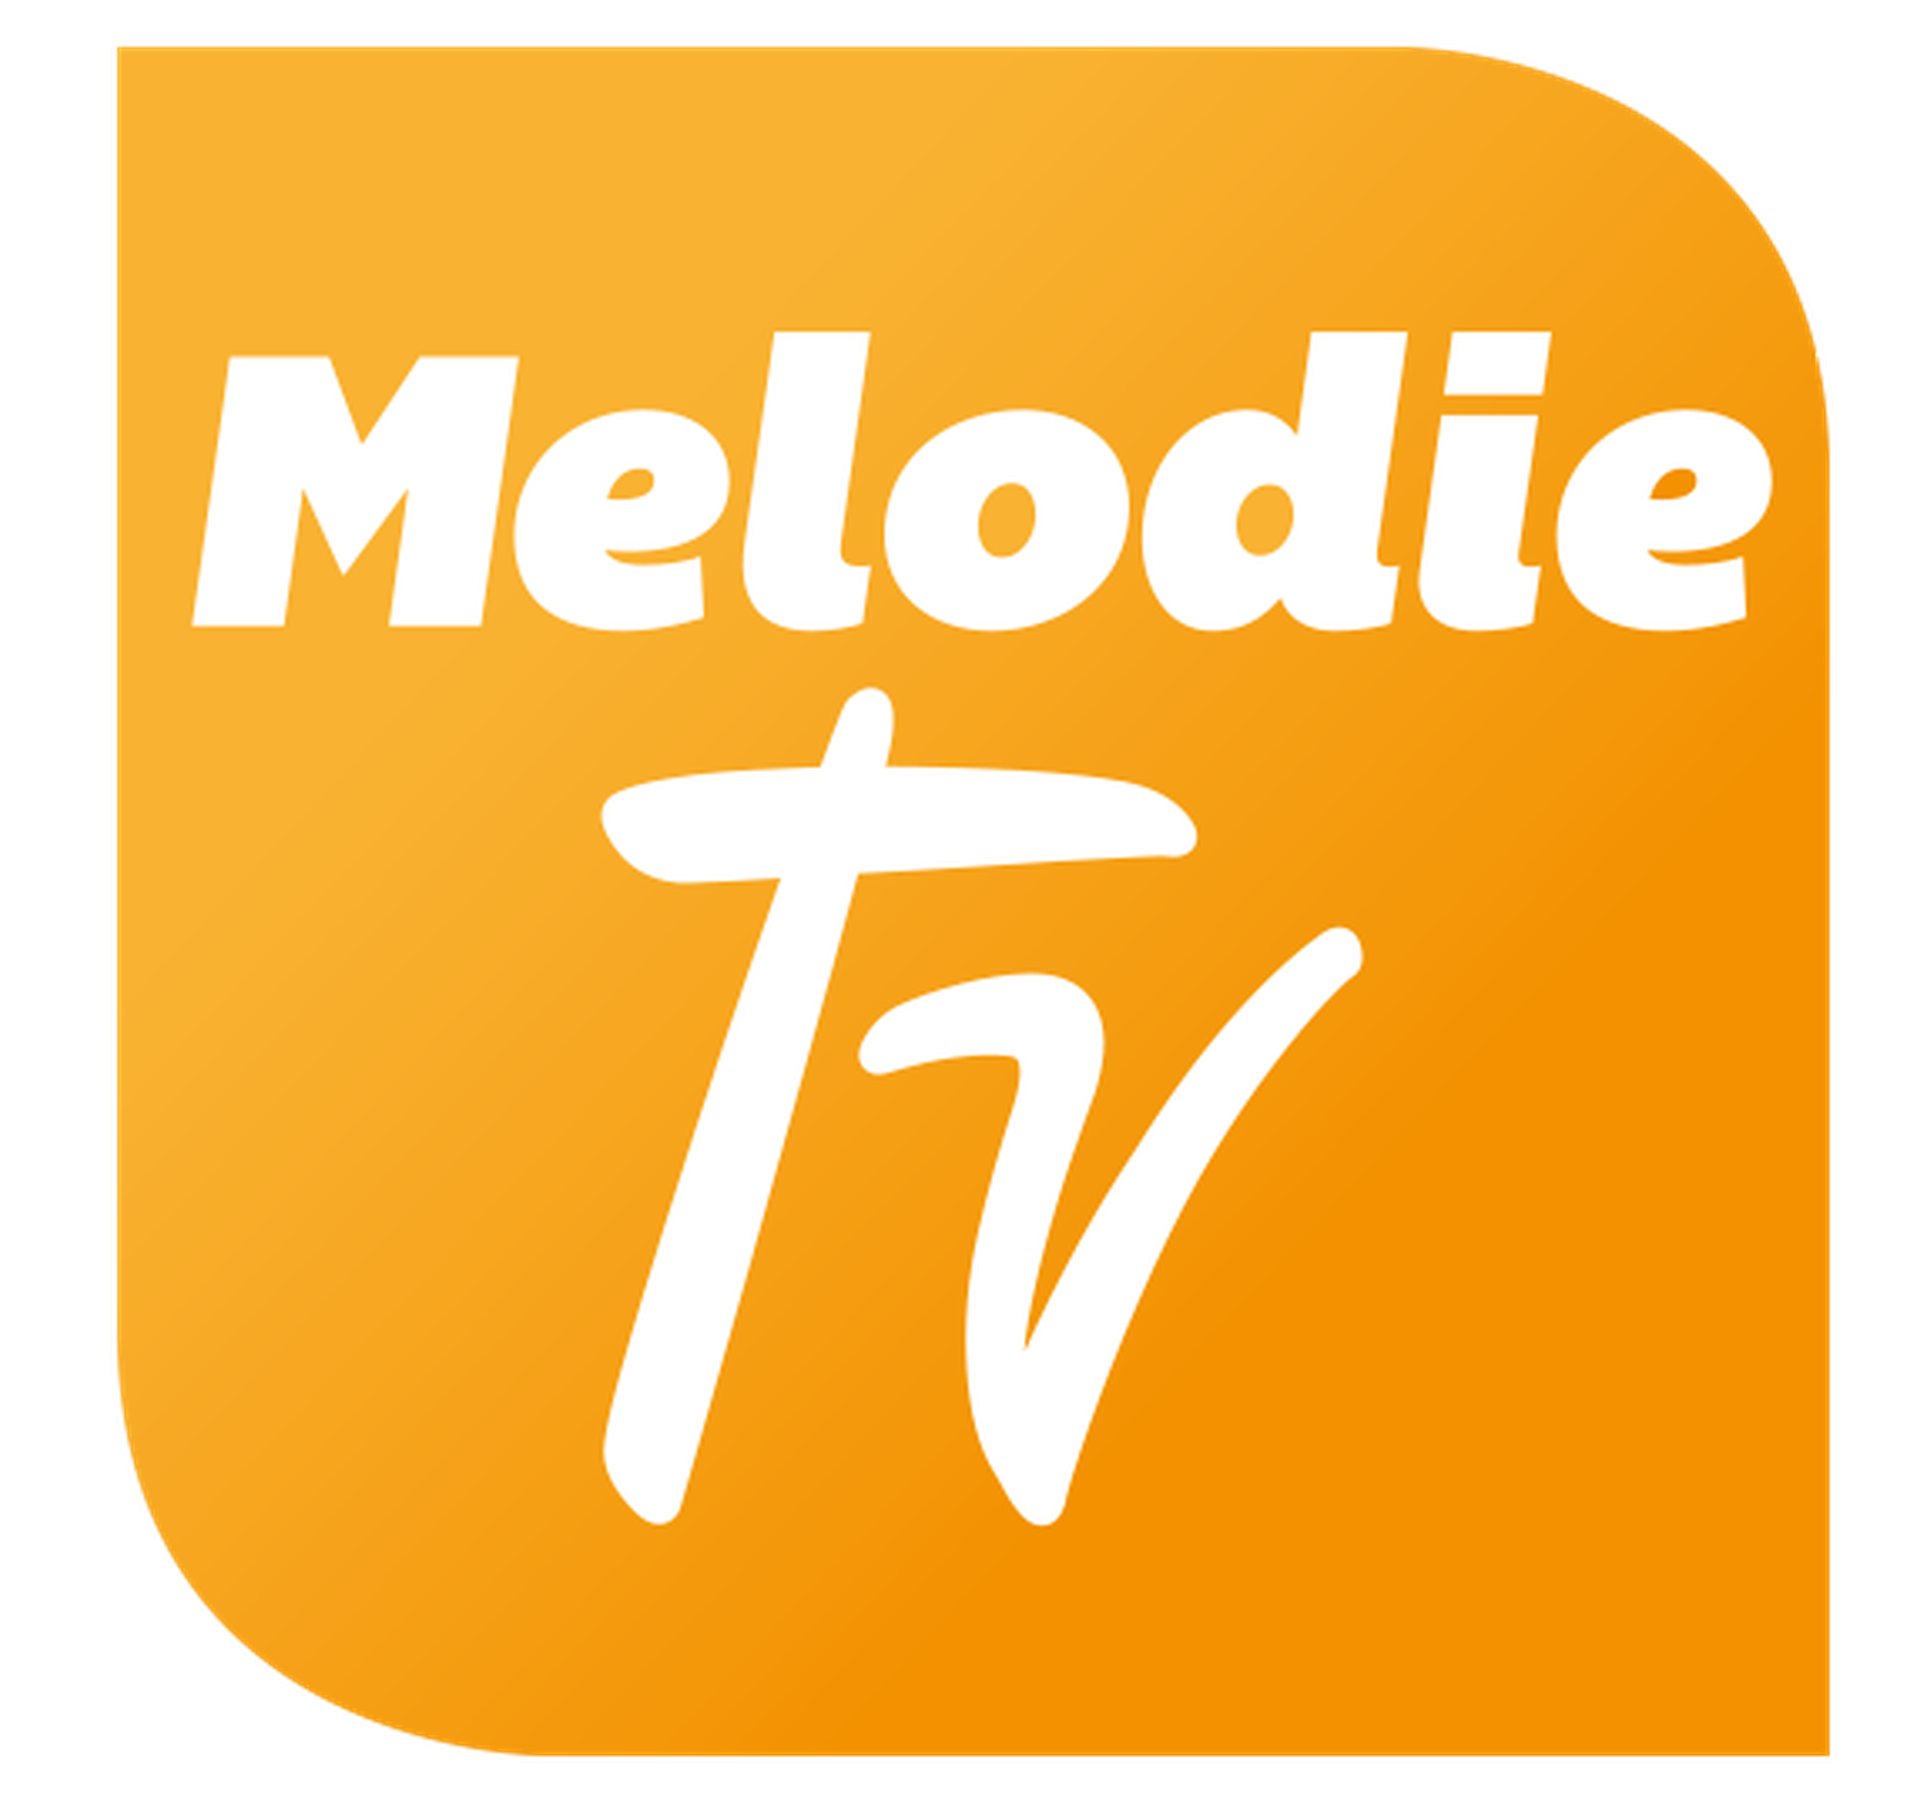 Melodie TV Logo 2D.png